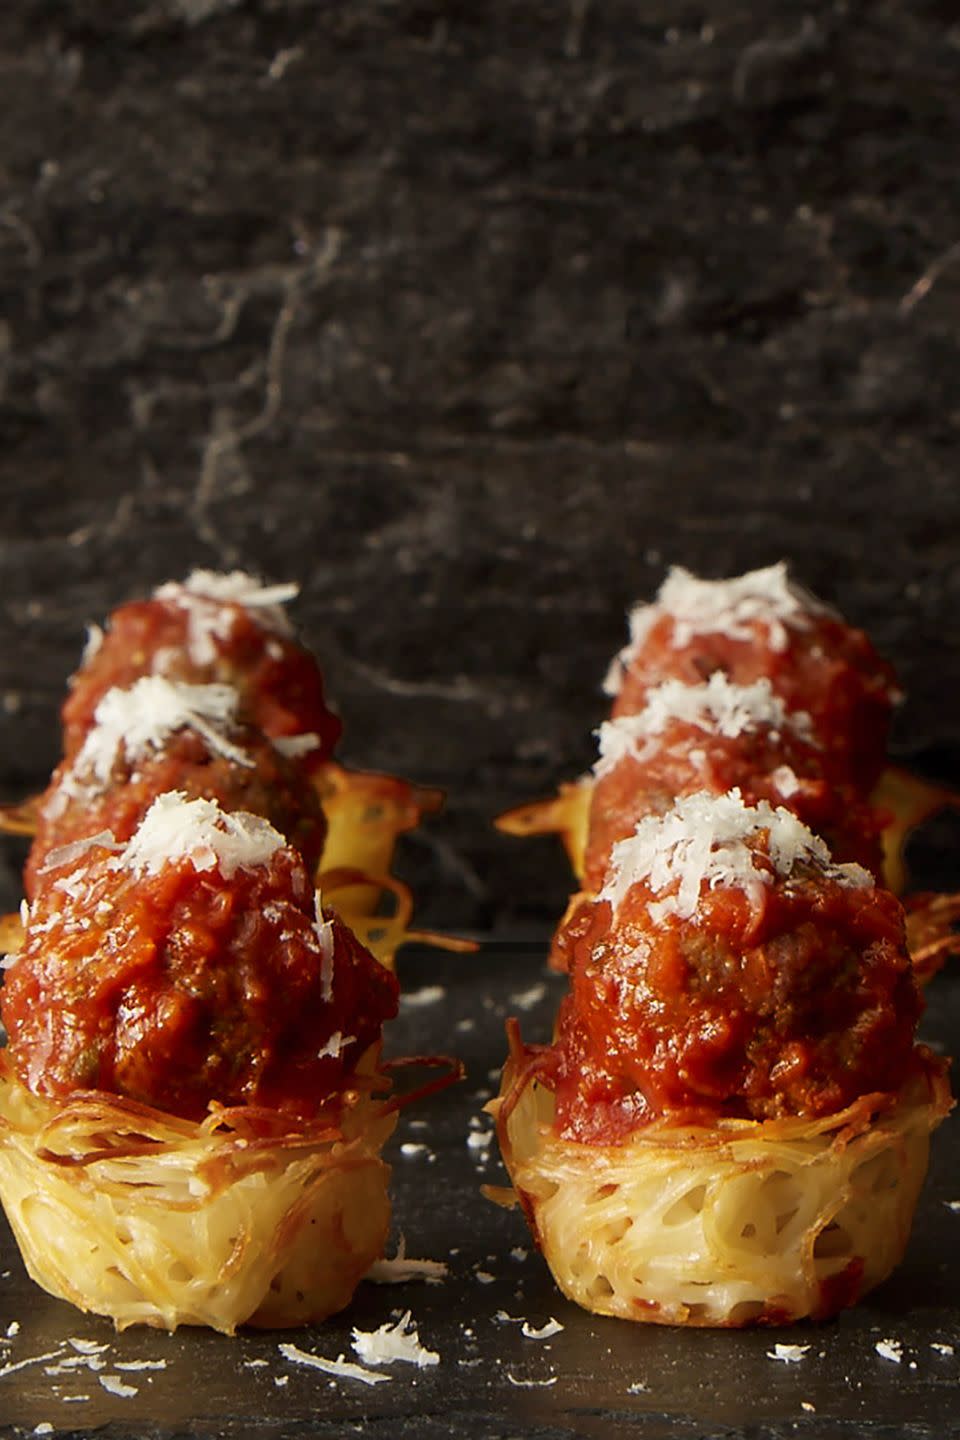 Spaghetti and Meatball Nests